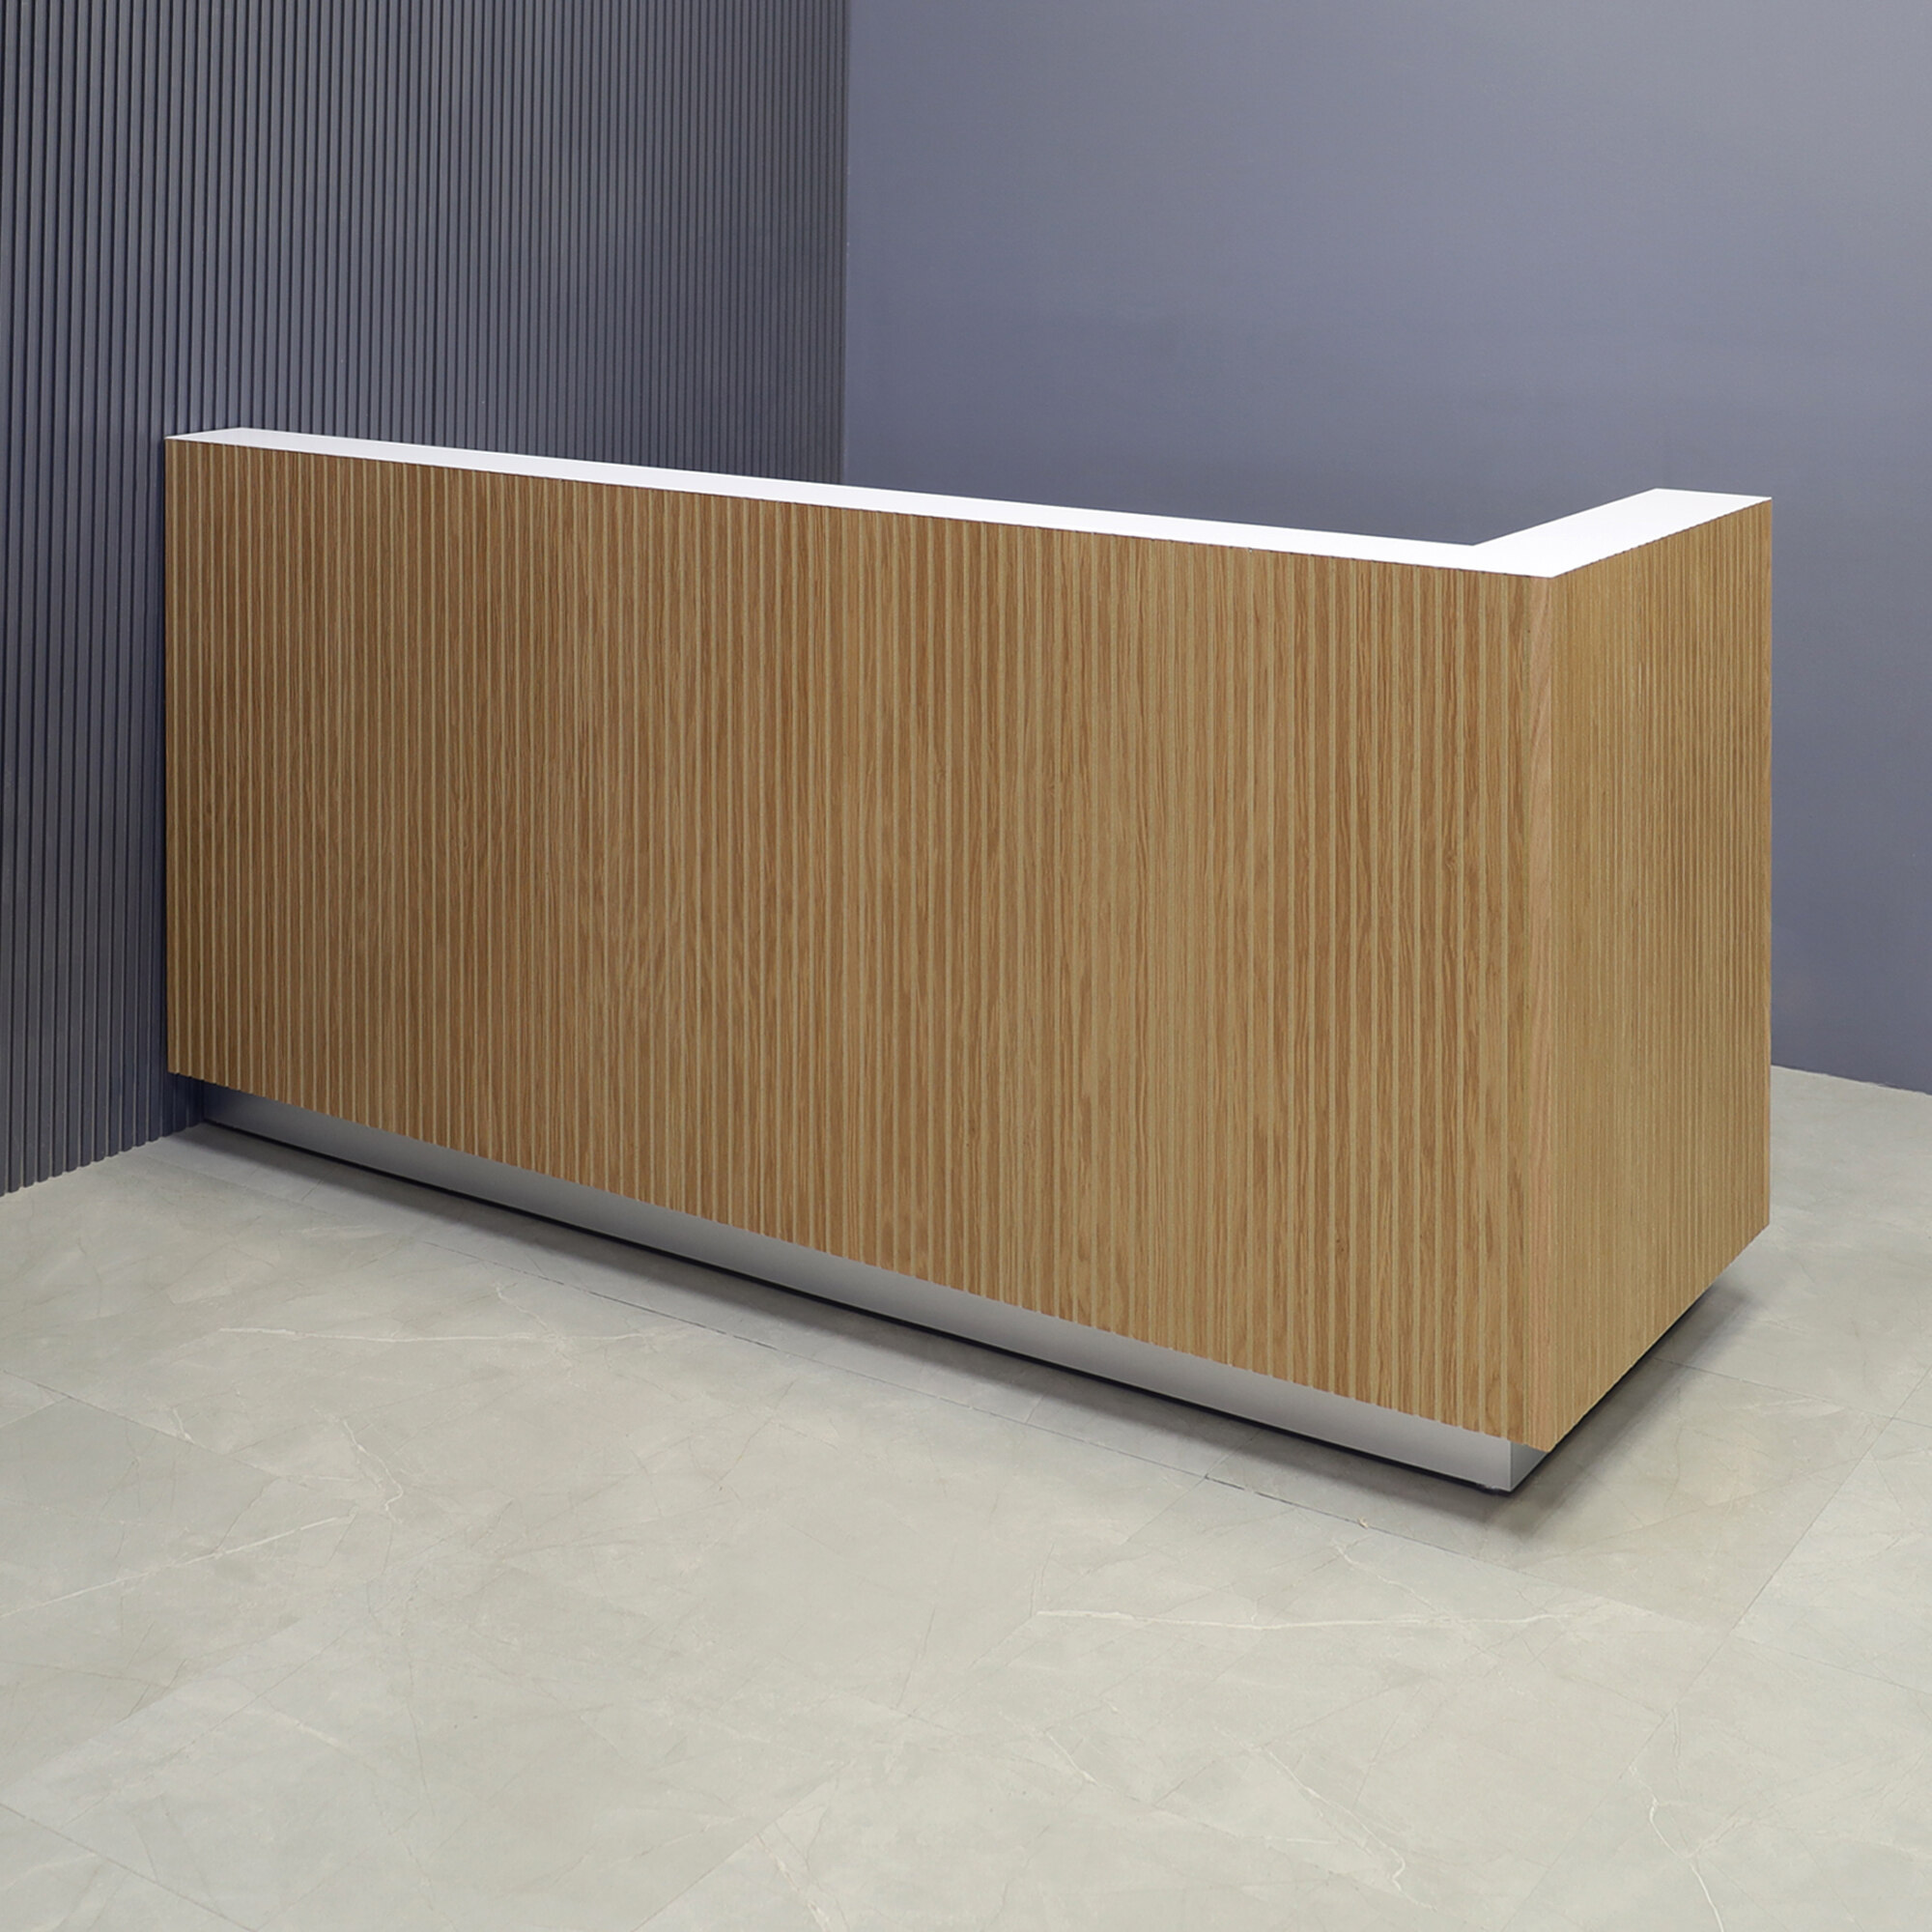 84-inch Dallas L-Shape Custom Reception Desk, right side l-panel when facing front in white oak tambour main desk, and white matte laminate workspace, with brushed aluminum toe-kick, shown here.